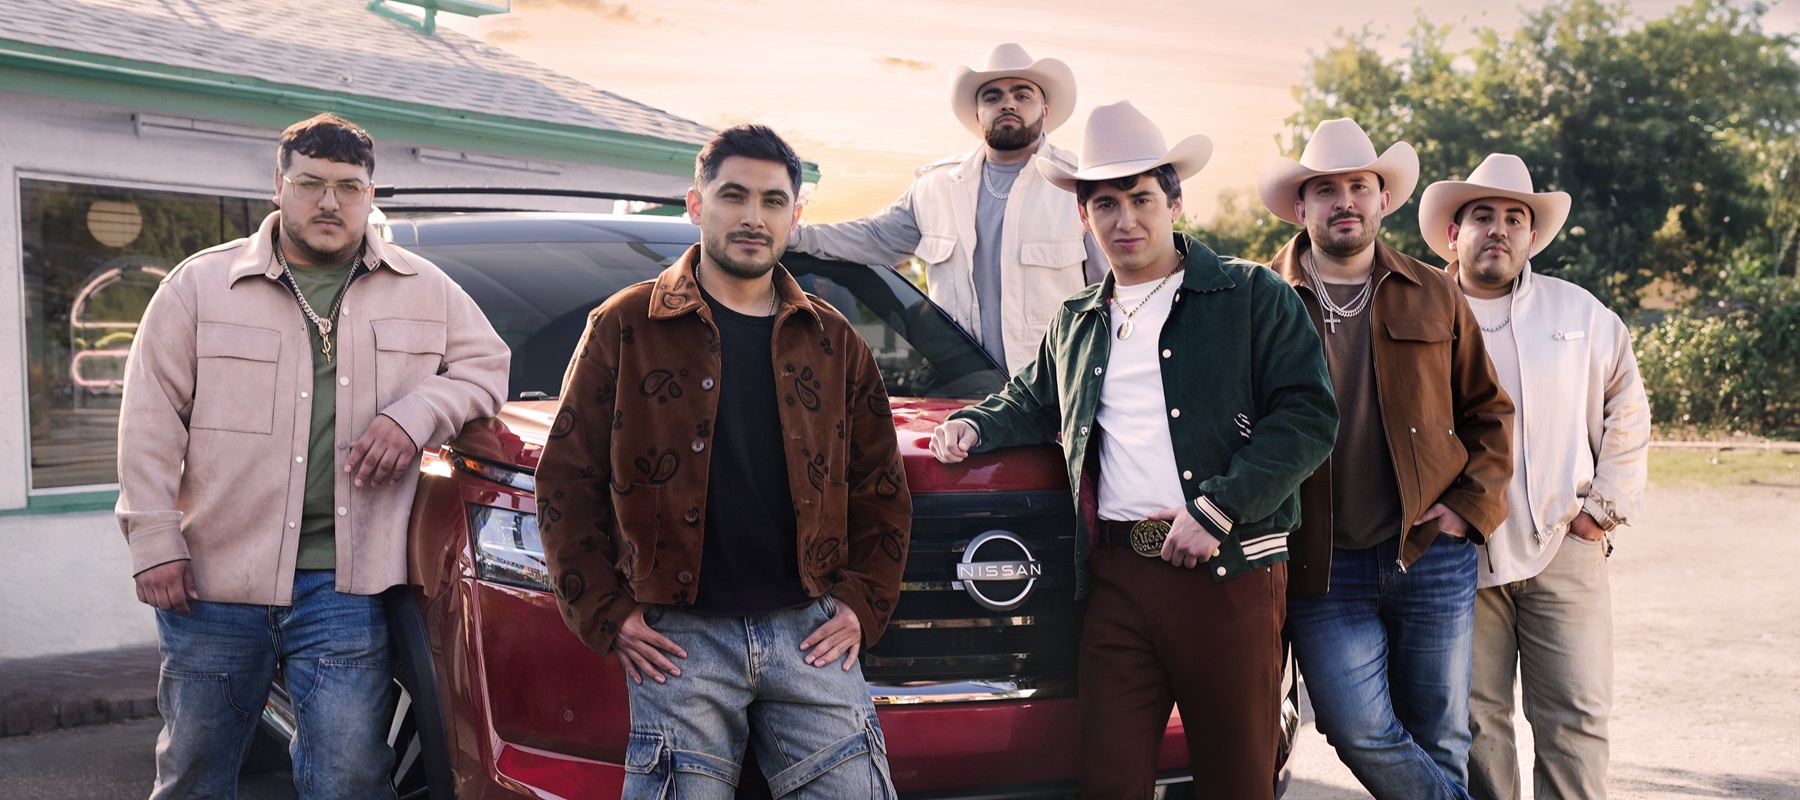 Nissan and TelevisaUnivision unveils integrated campaign targeting Latino audience